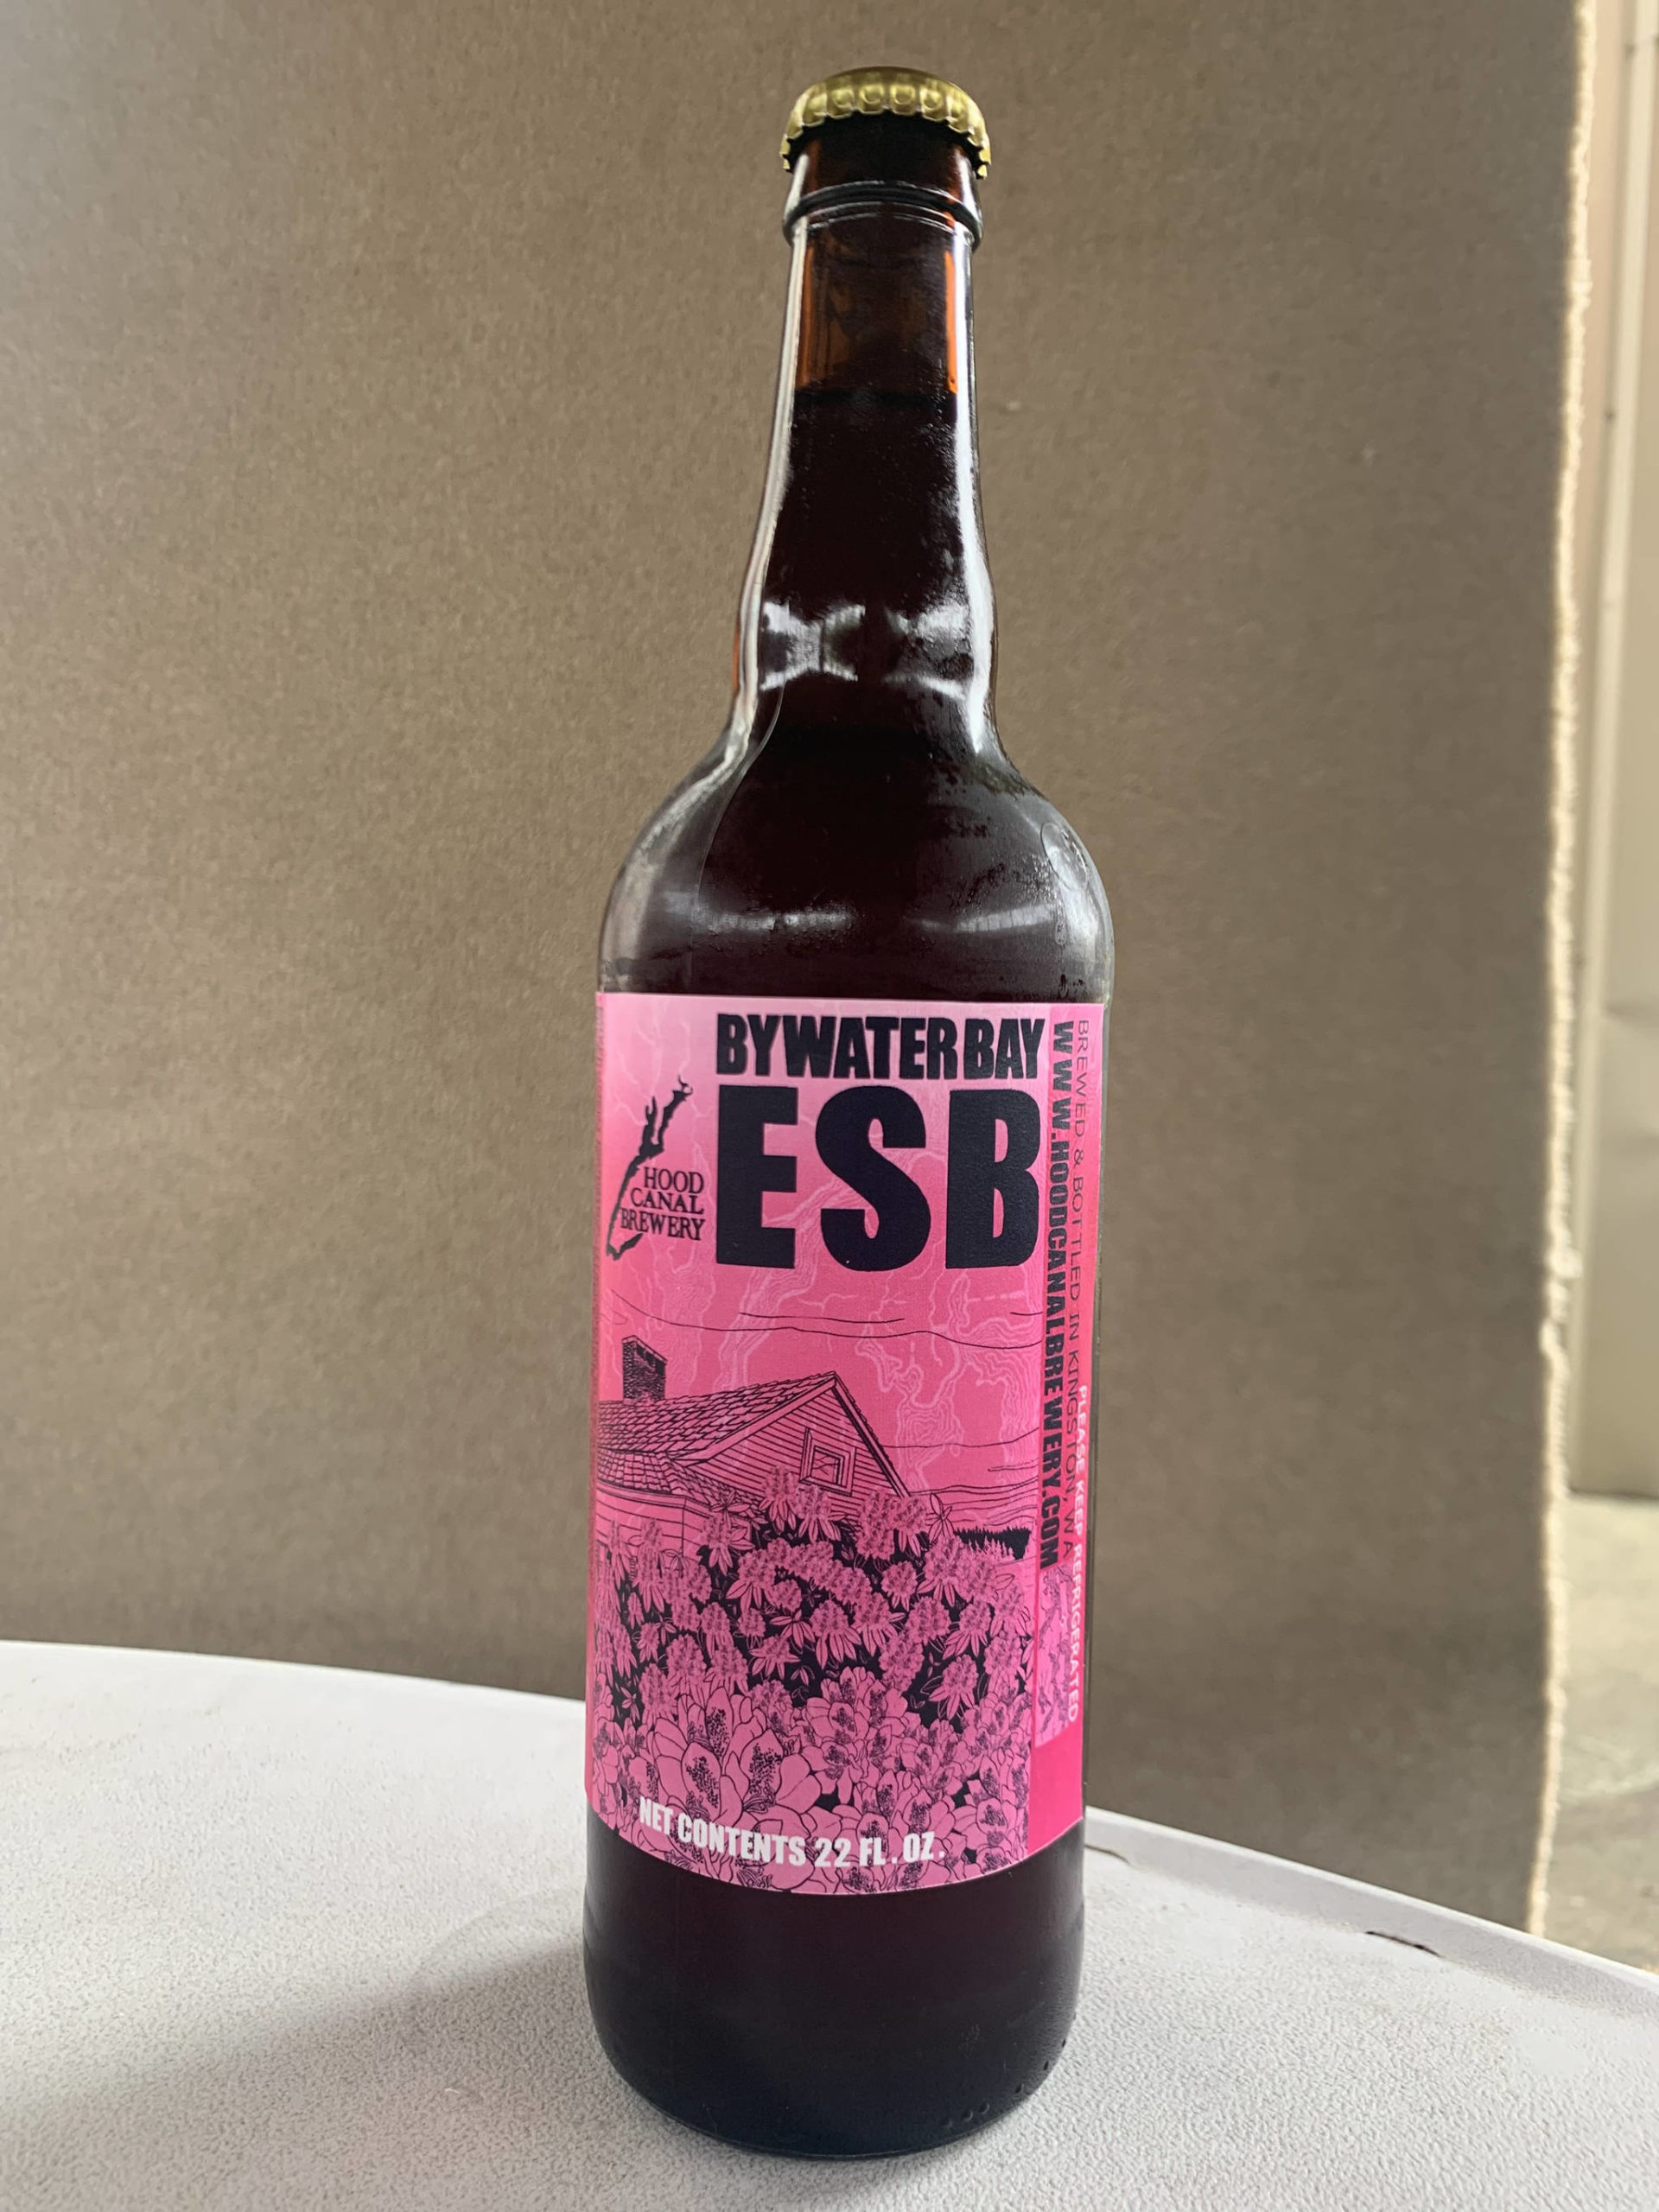 On tap and in bottle Hood Canal Brewing's Bywater Bay ESB is sure to be a favorite this summer. (courtesy photo)